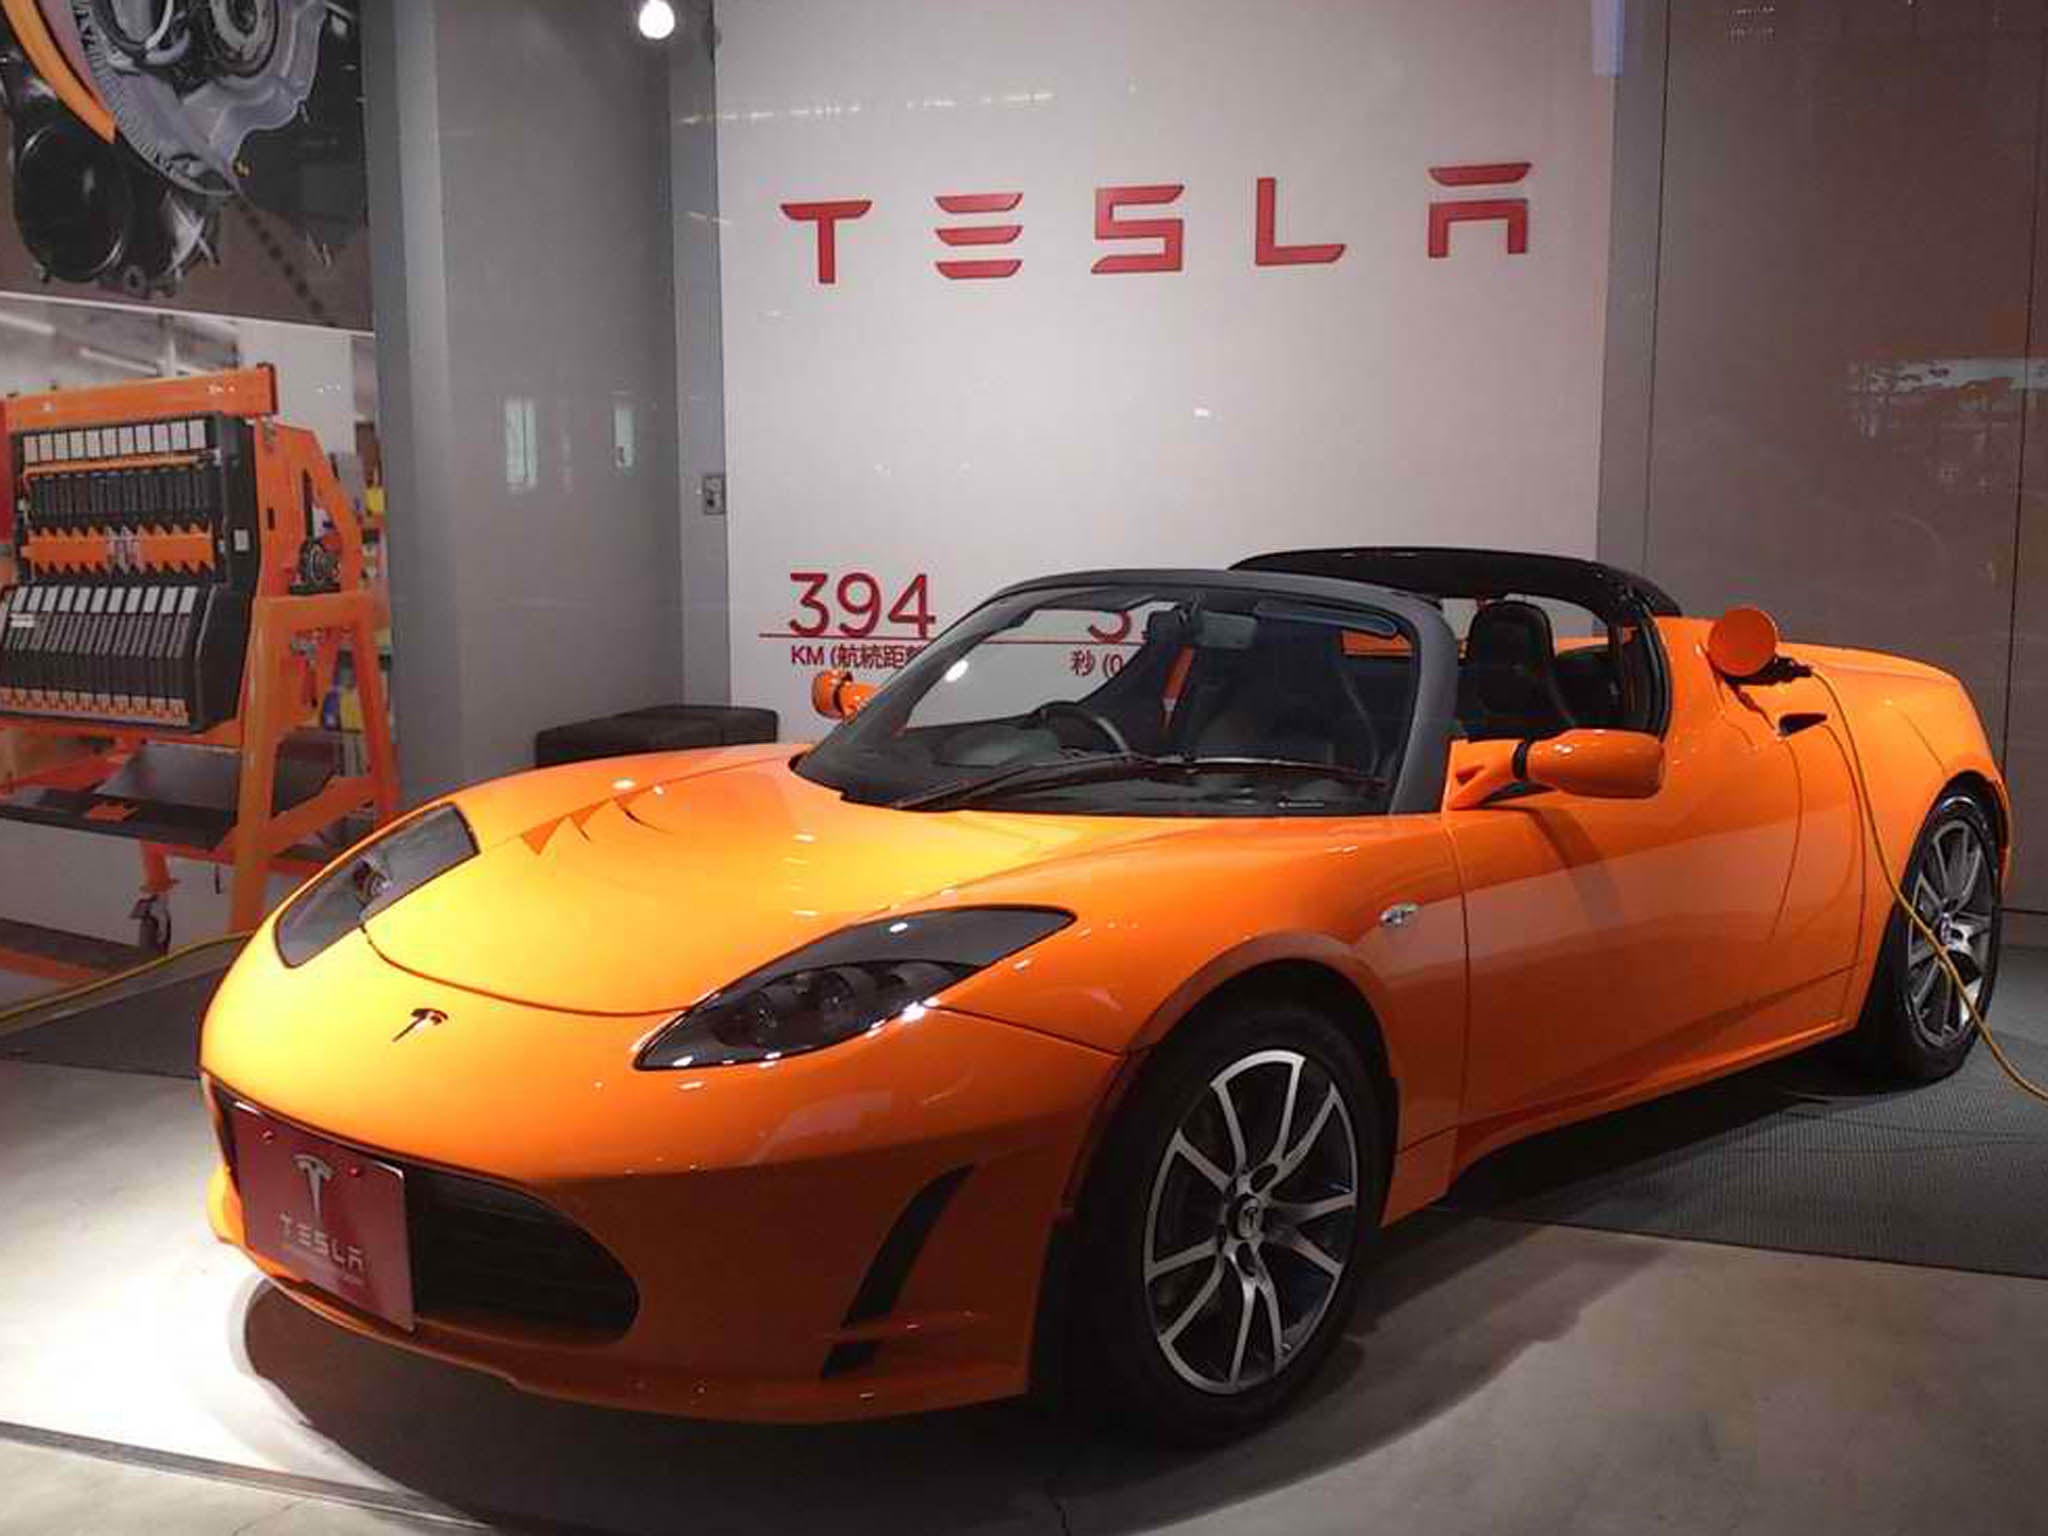 Tesla Motors could produce up to 100,000 cars in 2015